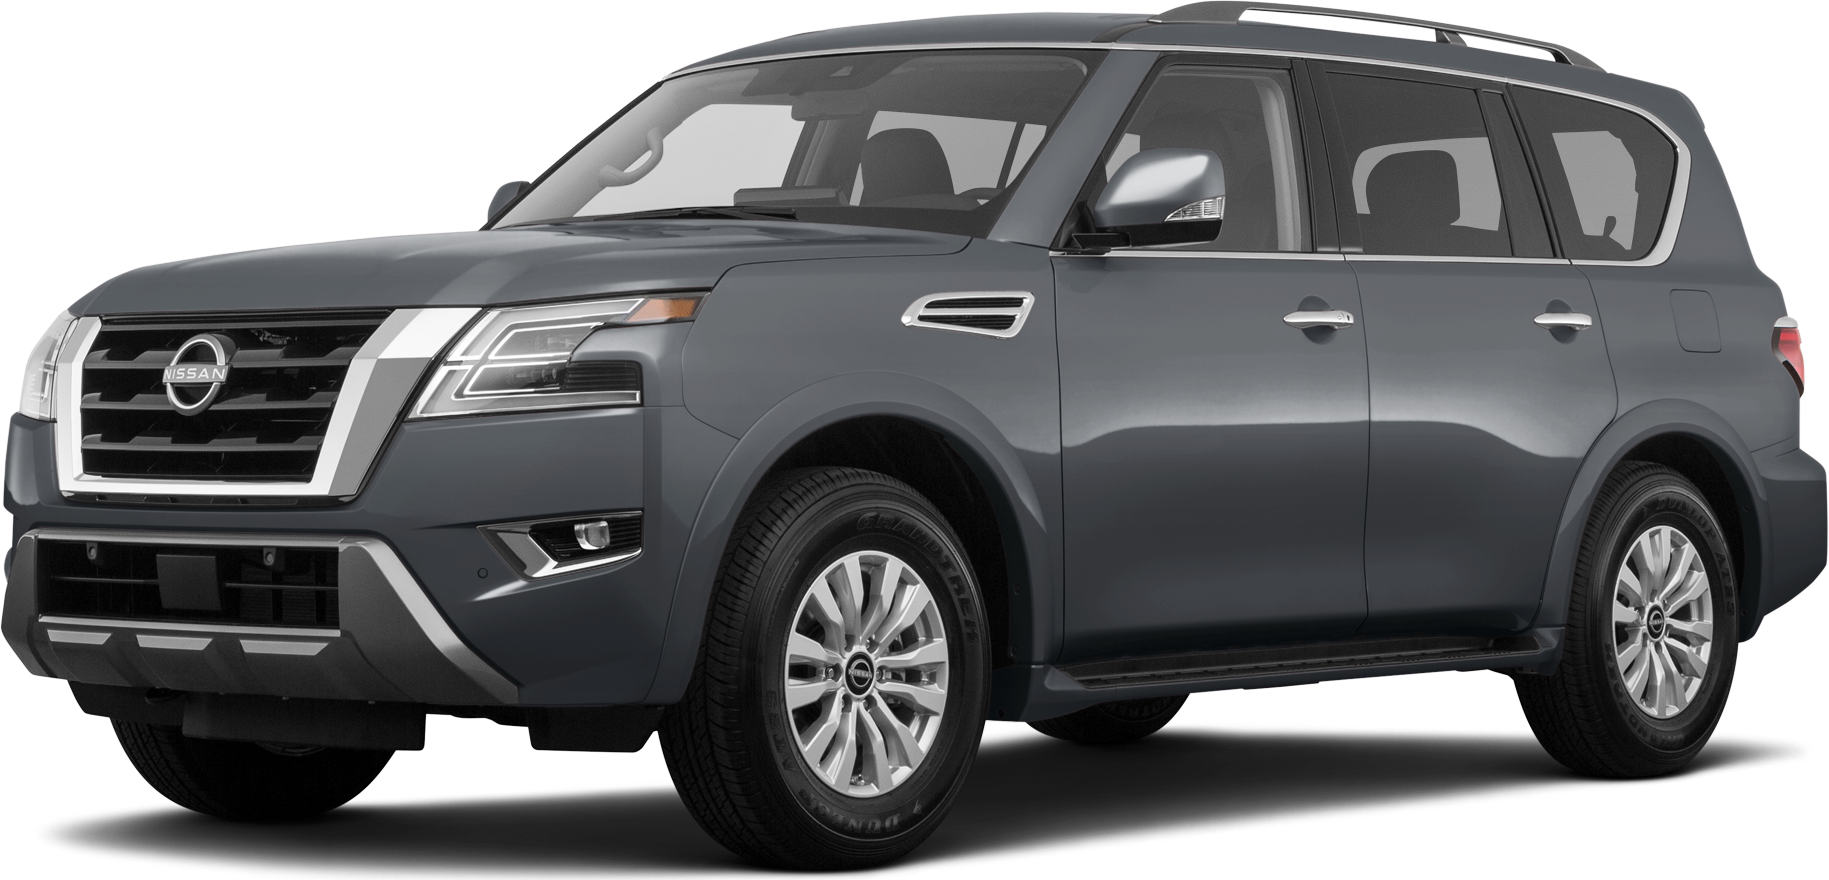 2022 Nissan Armada Prices, Reviews, and Pictures